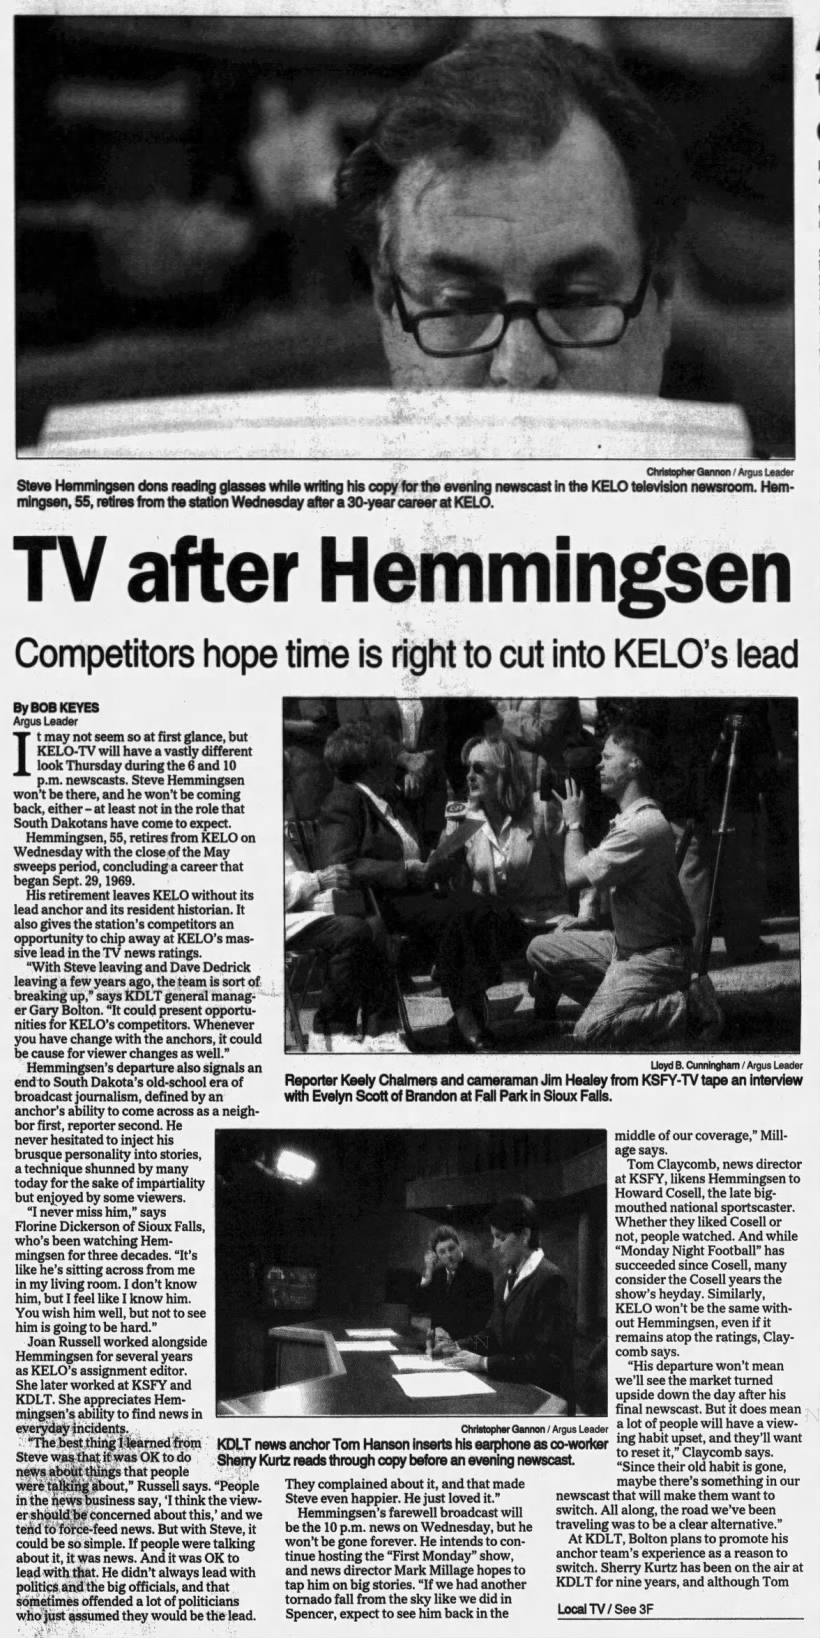 TV after Hemmingsen: Competitors hope time is right to cut into KELO's lead